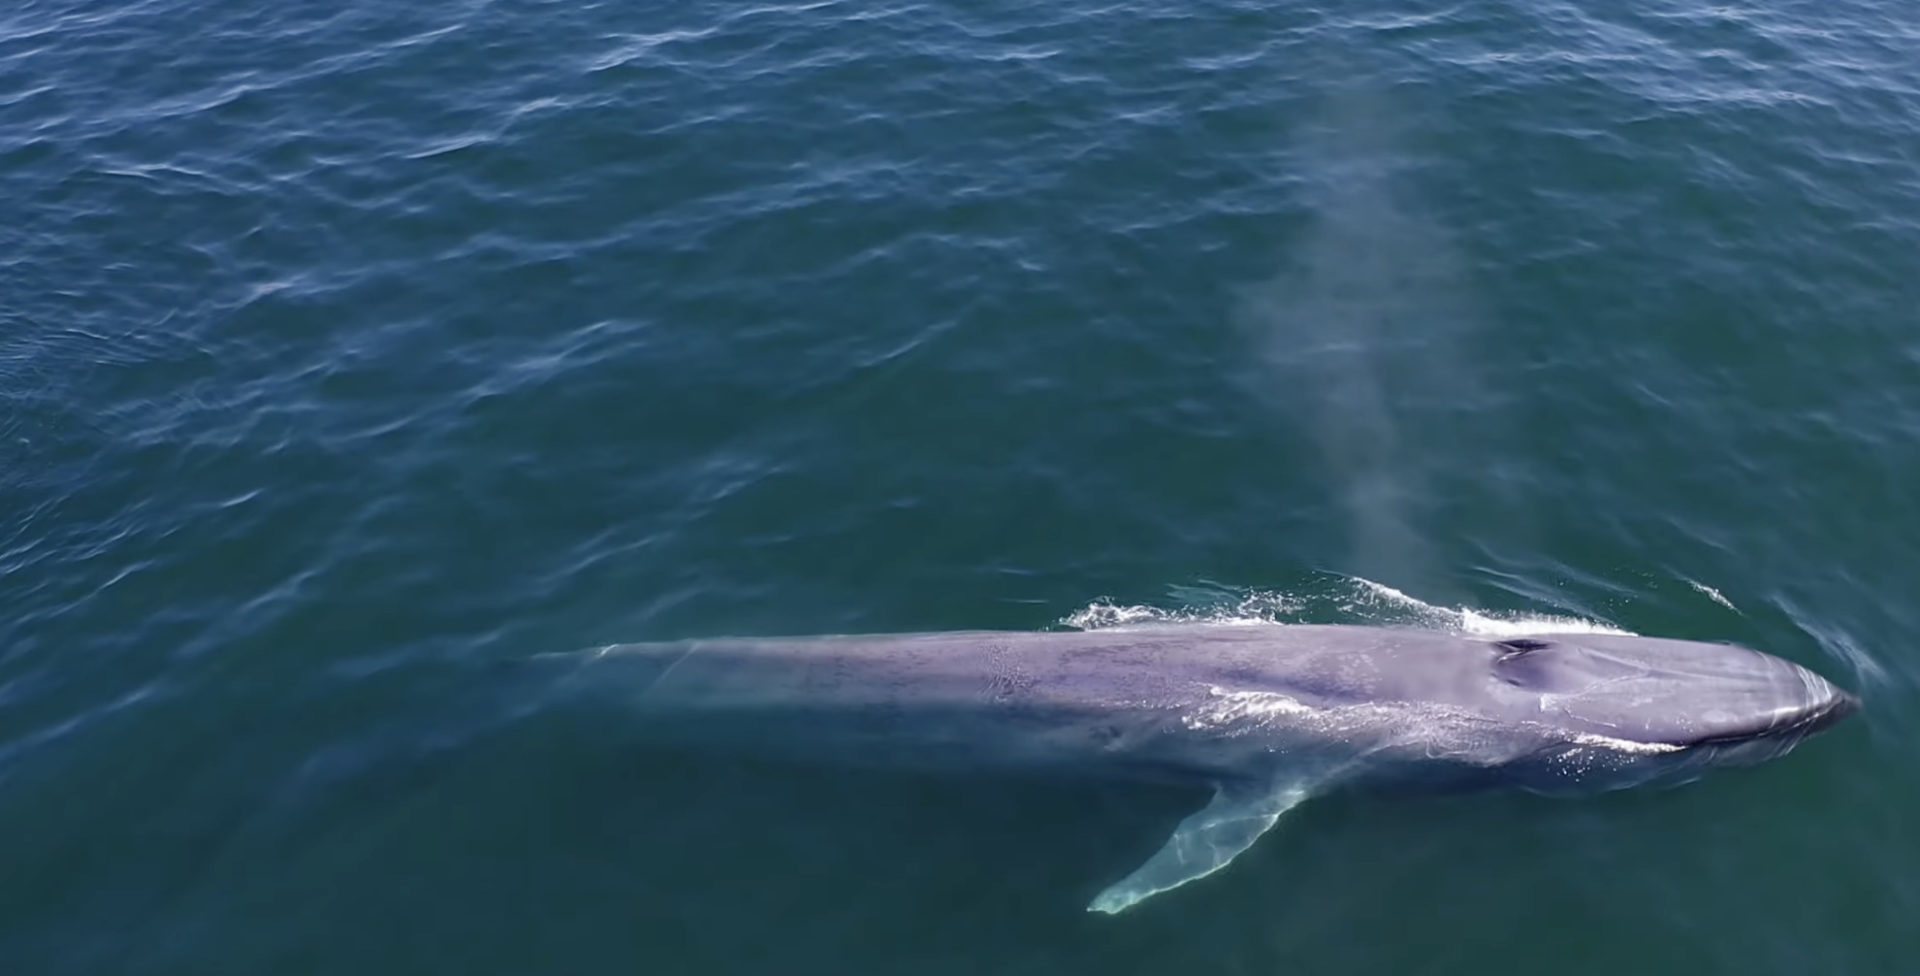 A blue whale in the ocean photographed from above. The whale has come to the surface and is expelling water from it's blowhole.